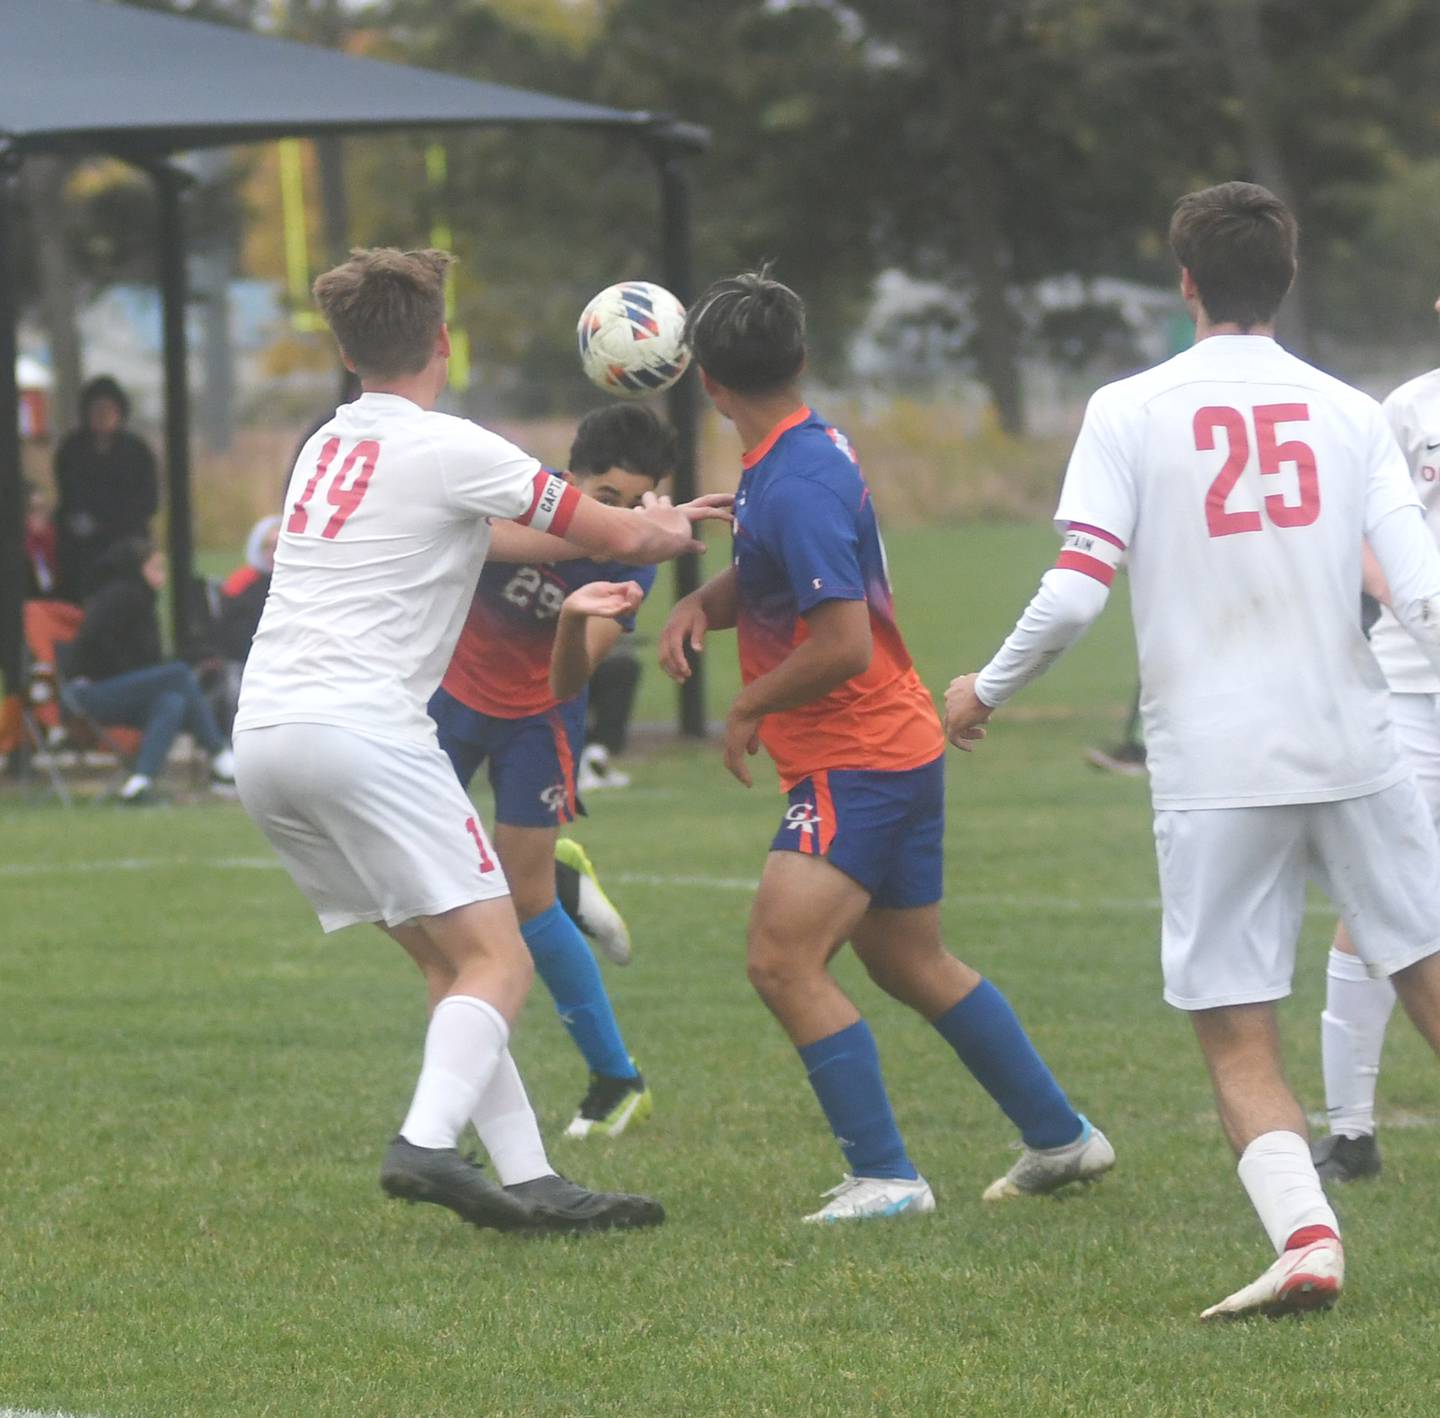 Genoa-Kingston's Max Rodriguez heads the ball in for a goal during regional action in Oregon on Friday, Oct. 14, 2022.